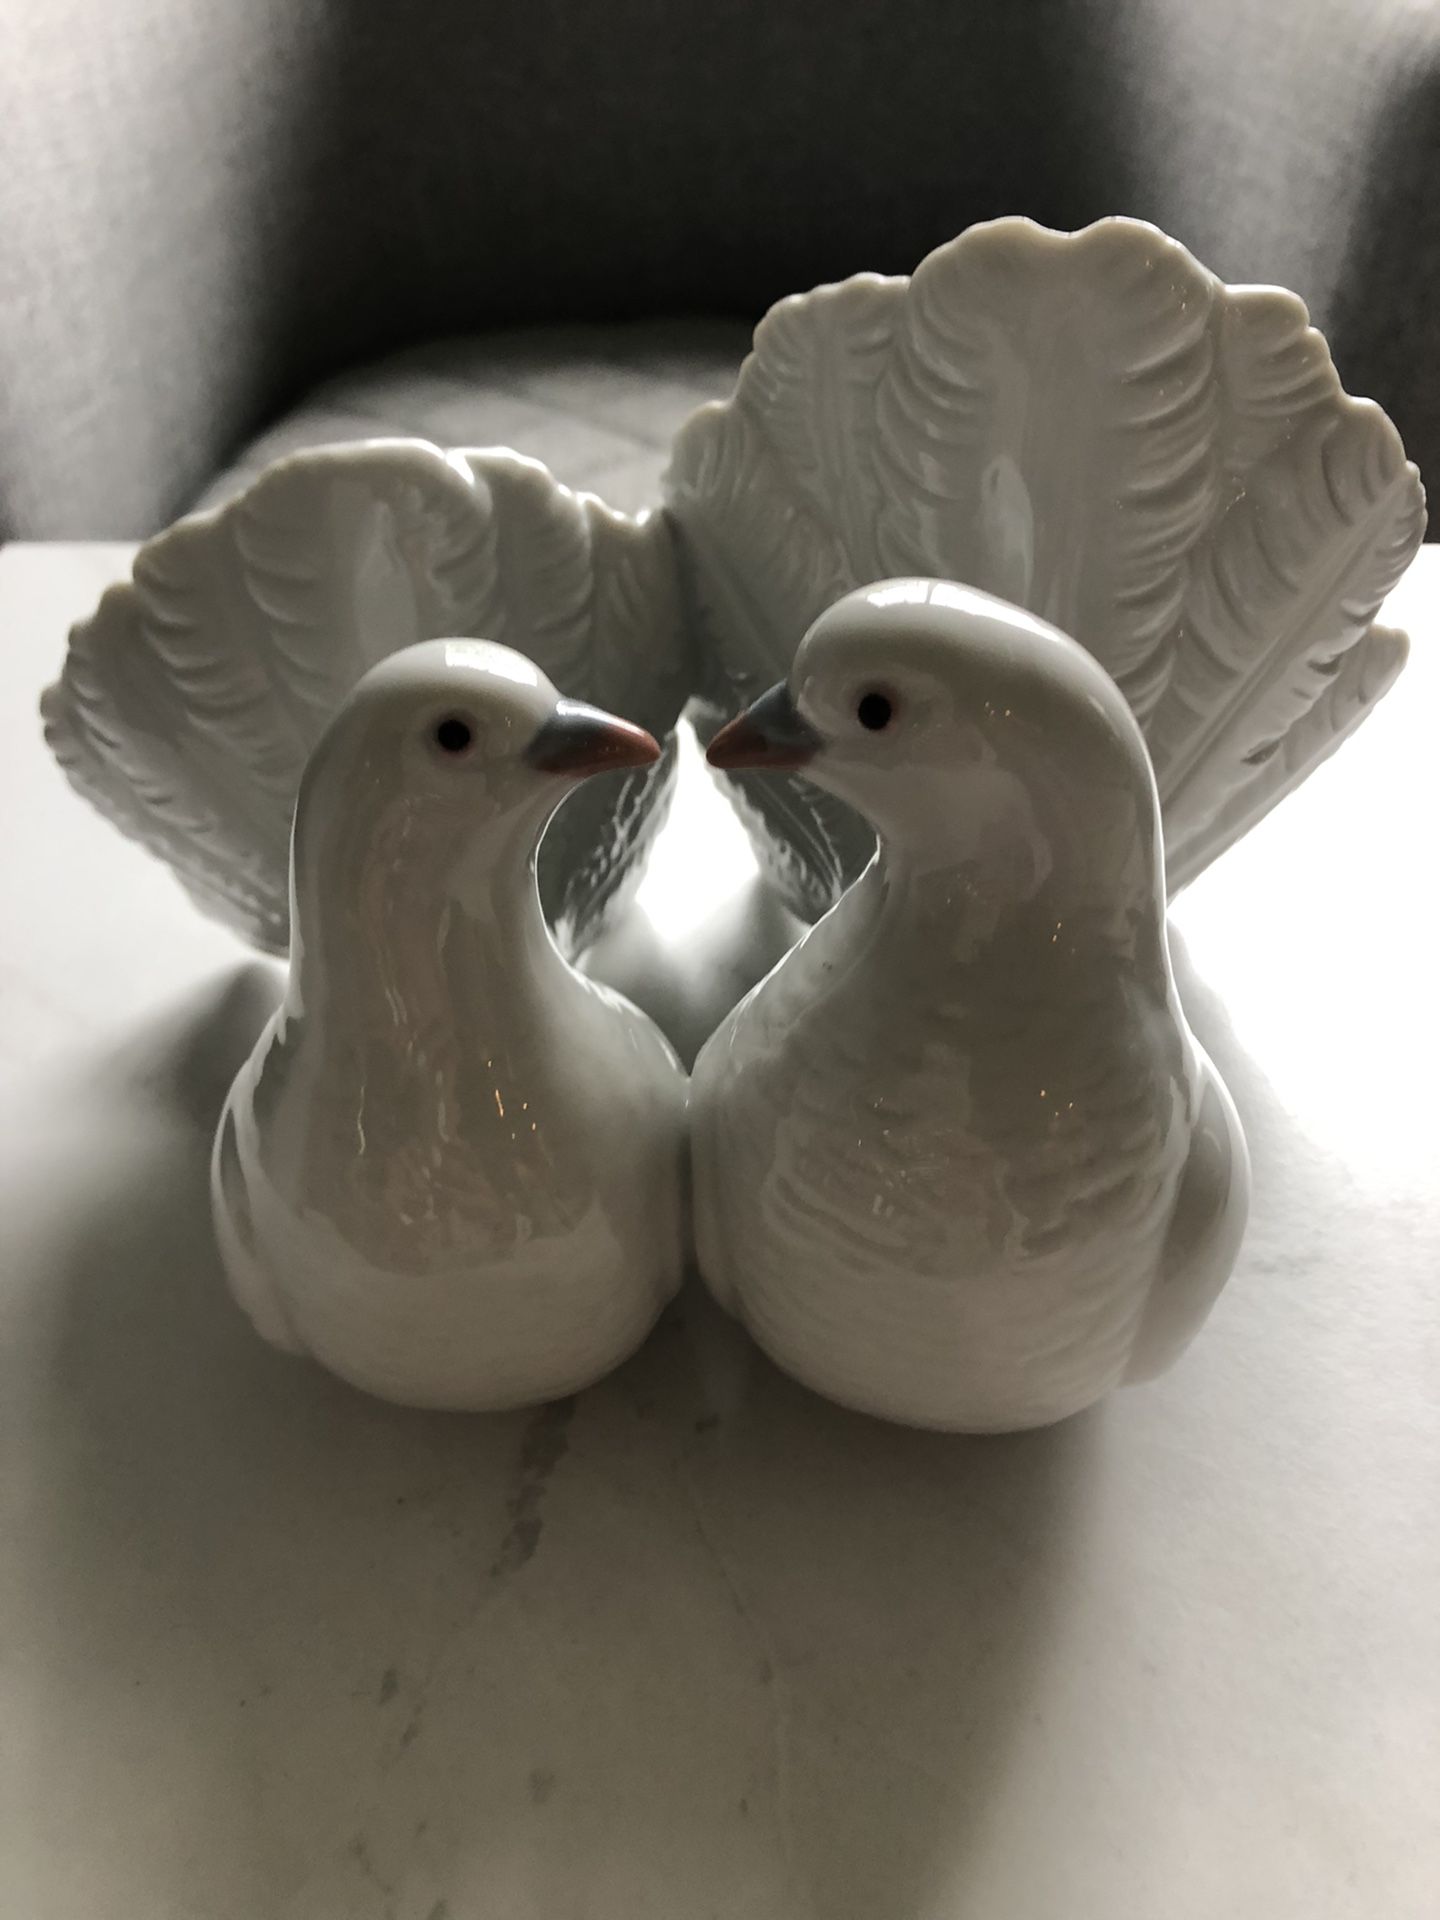 Lladro “Couple of Doves” Porcelain Figurines